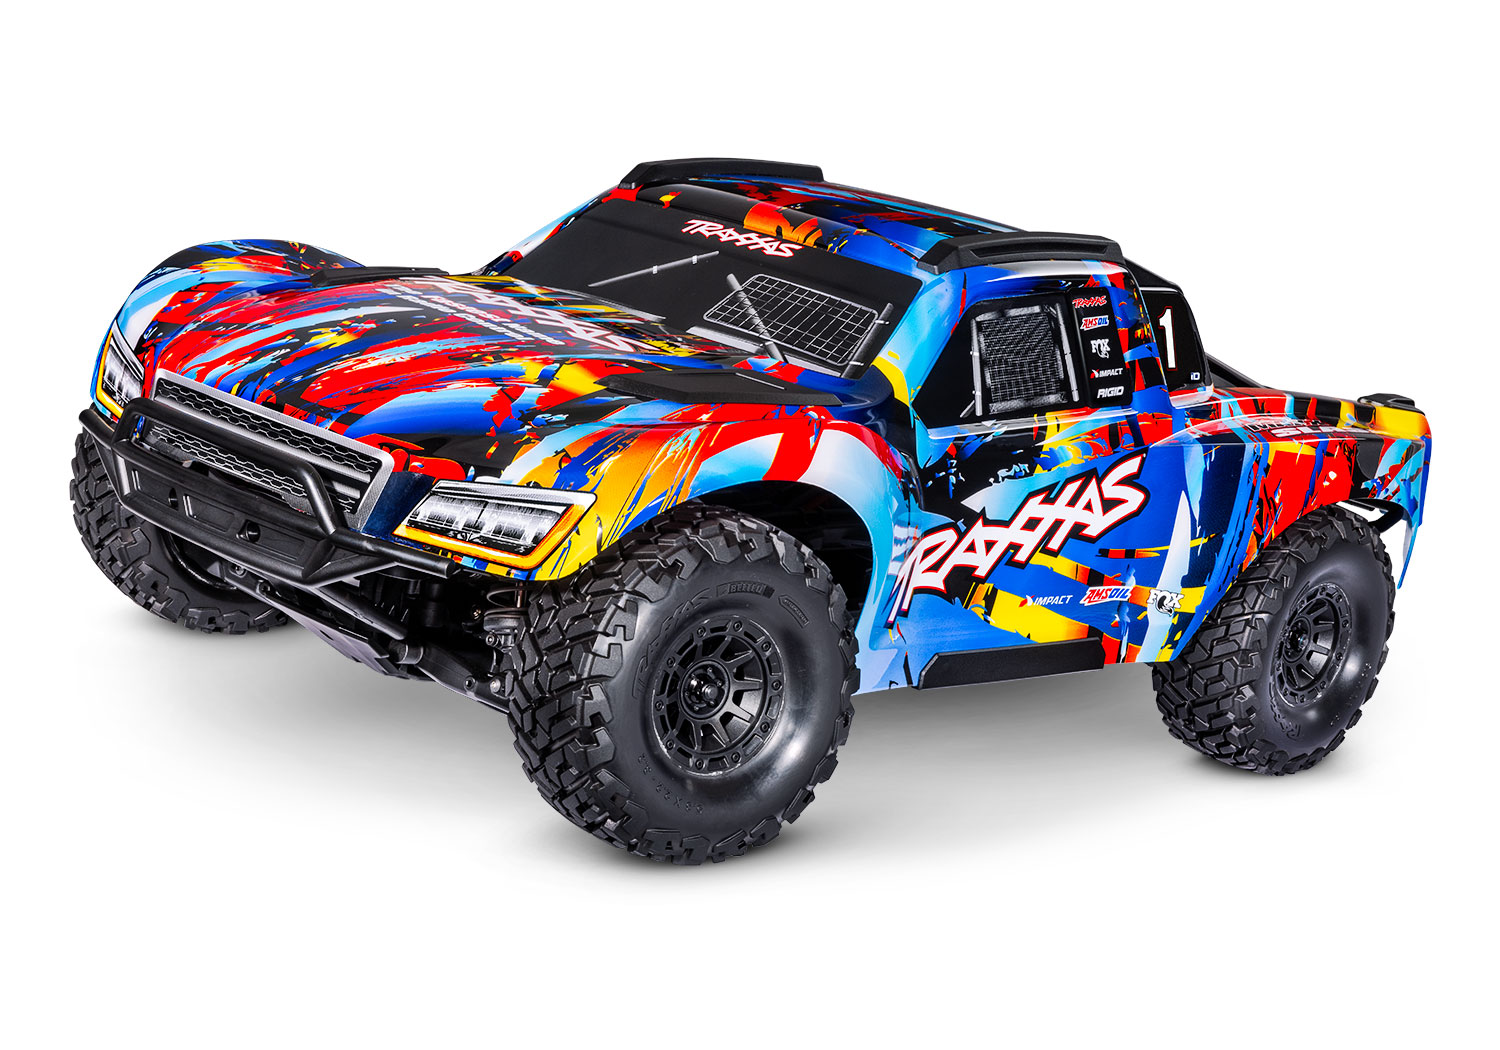 NOUVEAU PACK ECO 100% RTR MAXX SLASH ROCK N ROLL 4X4 BRUSHLESS LIPO 6S CHARGEUR TRAXXAS SAC OFFERT